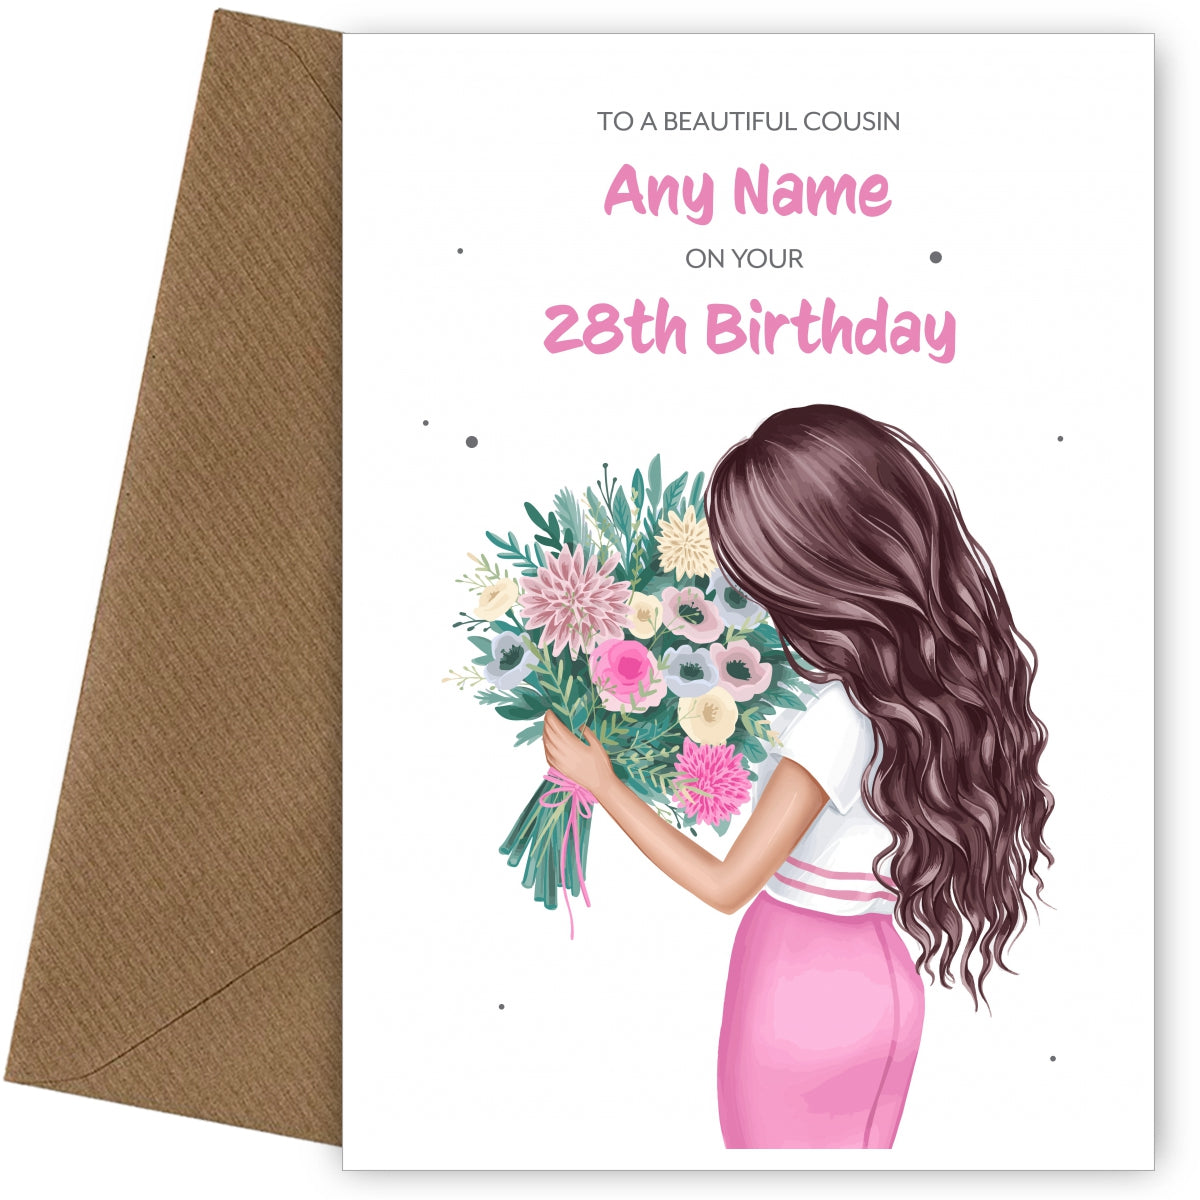 28th Birthday Card for Cousin - Beautiful Brunette